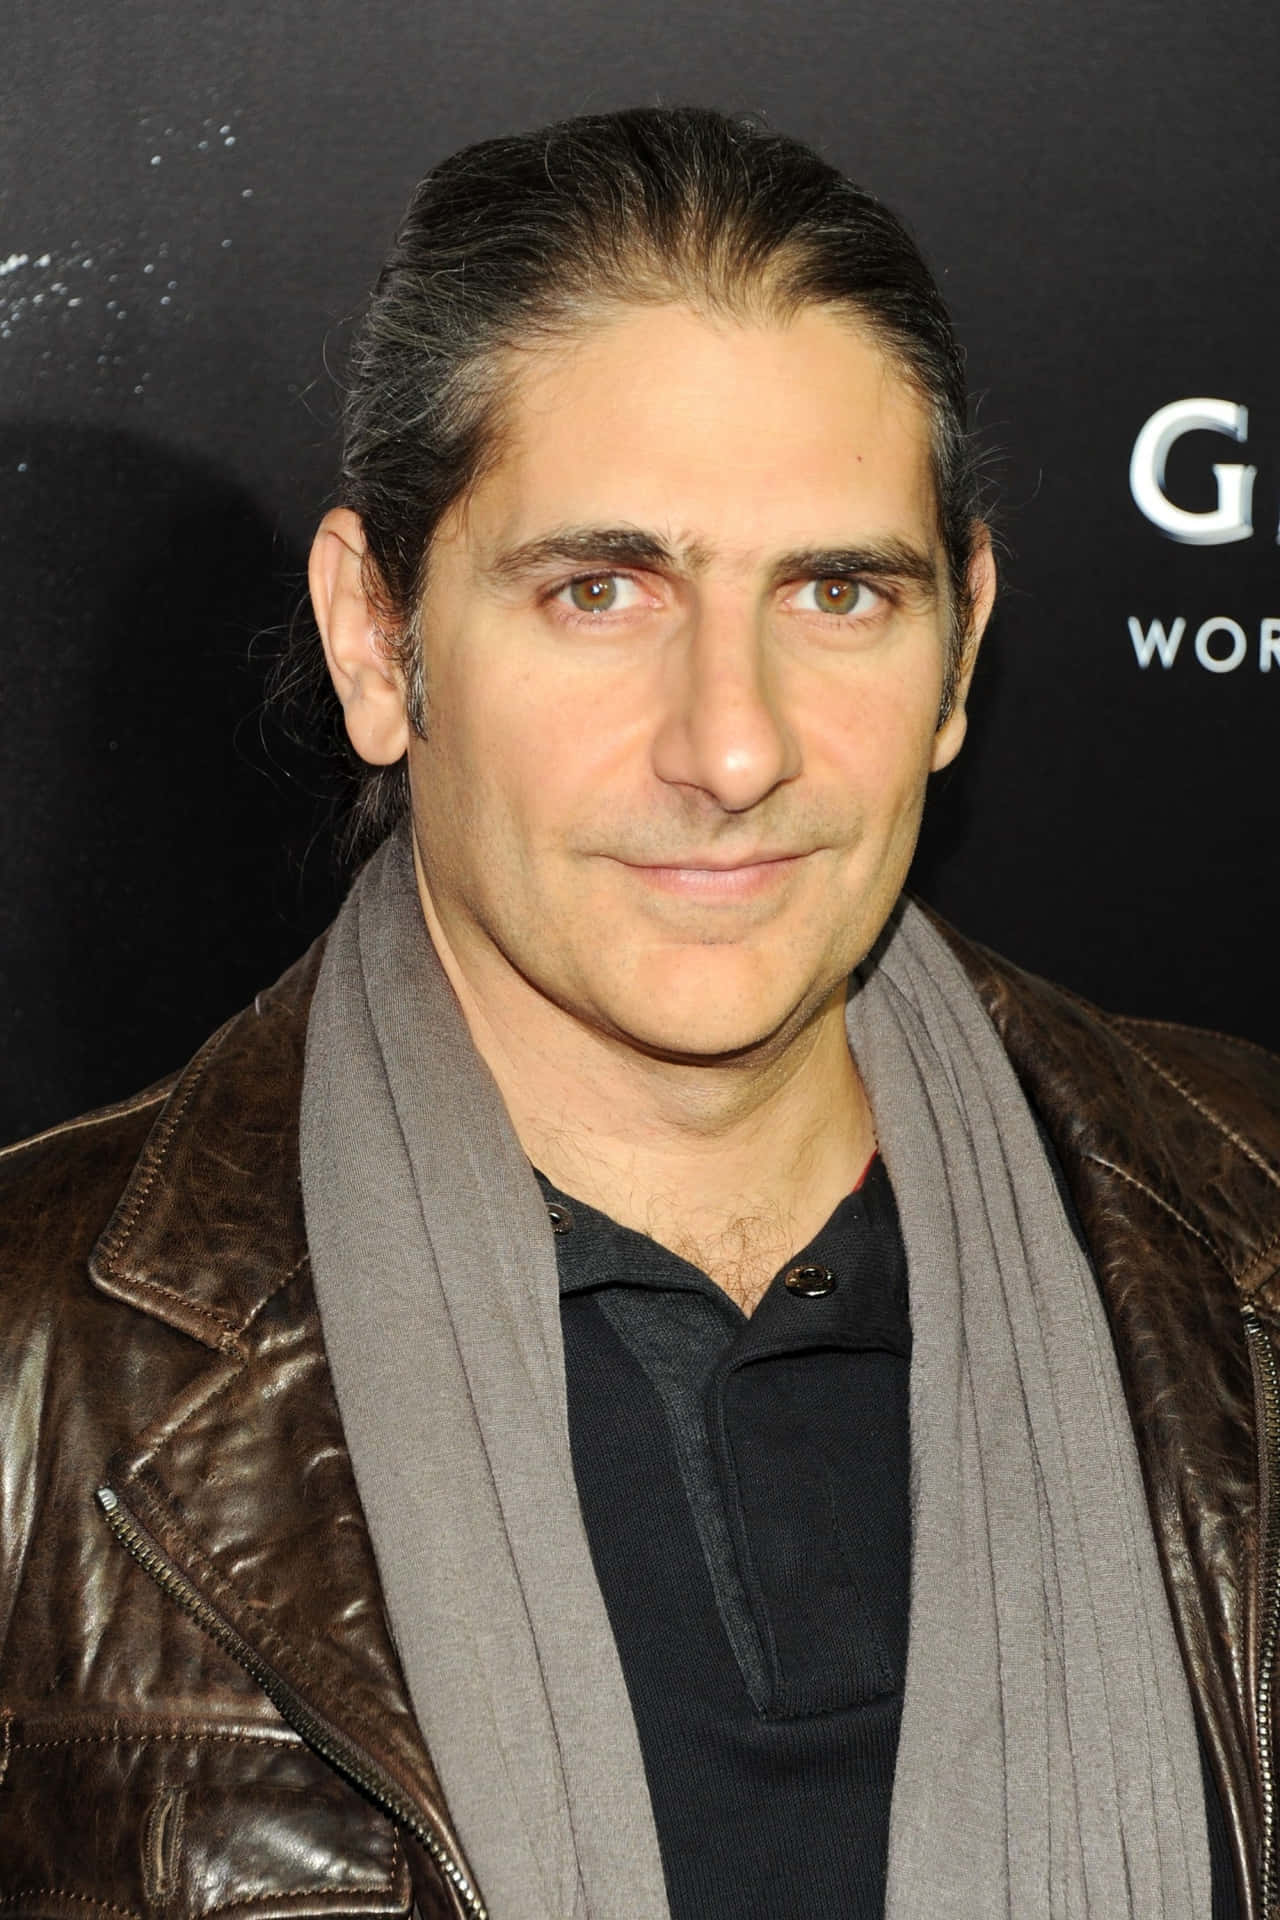 Michael Imperioli’s Hollywood career takes center stage Wallpaper